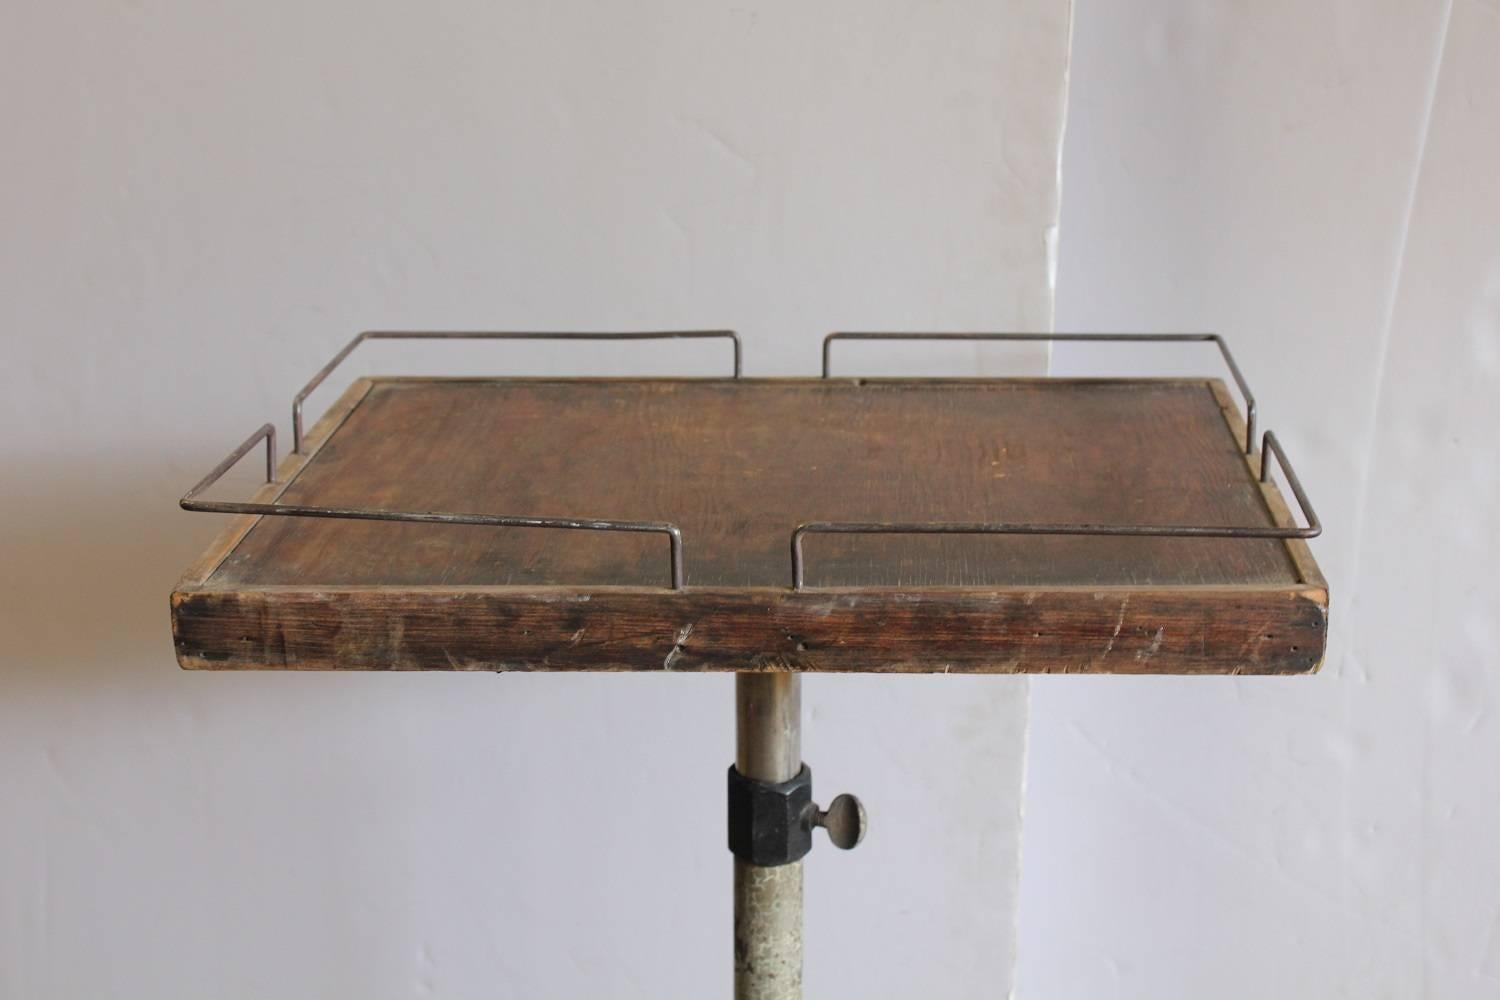 Antique Industrial adjustable side table. Measures: Height 46.5